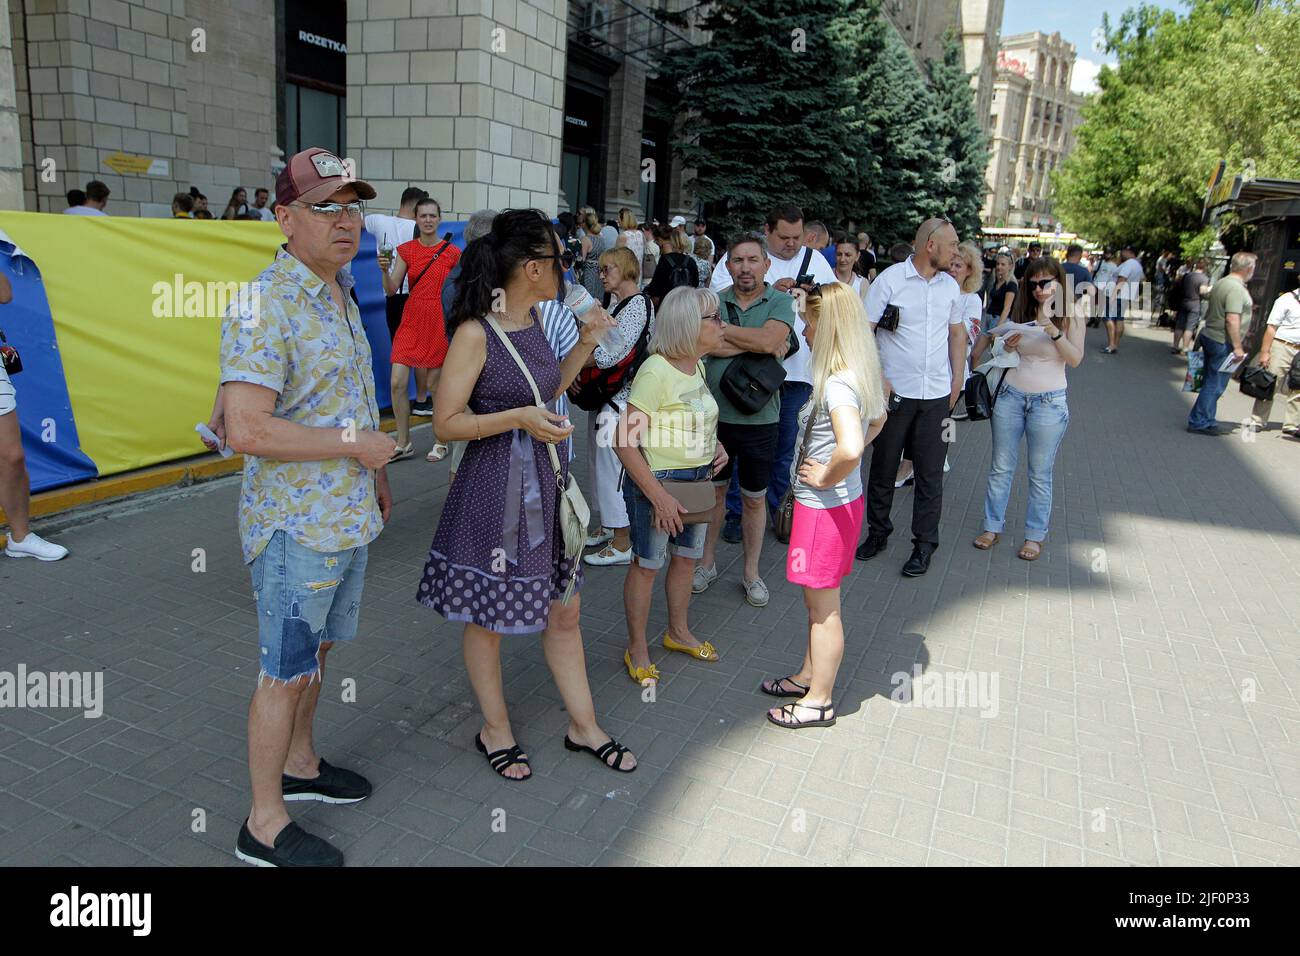 Kiev, Ukraine - June 28, 2022 - People queue to buy the Ukrainian Dream postage stamps, envelopes and postcards outside the Central Post Office in Maidan Nezalezhnosti on Constitution Day, Kyiv, capital of Ukraine. Sofiia Kravchuk, 11, from Liuboml, Volyn Region, depicted the Antonov An-225 Mriya aircraft in a drawing submitted to the What Does Ukraine Mean to Me? contest held in 2021, the year marking 30 years of Ukraine's independence. The An-225 Mriya ( (a 'dream' in Ukrainian) was destroyed in the Battle of Antonov Airport during the 2022 Russian invasion of Ukraine. This photo cannot be d Stock Photo